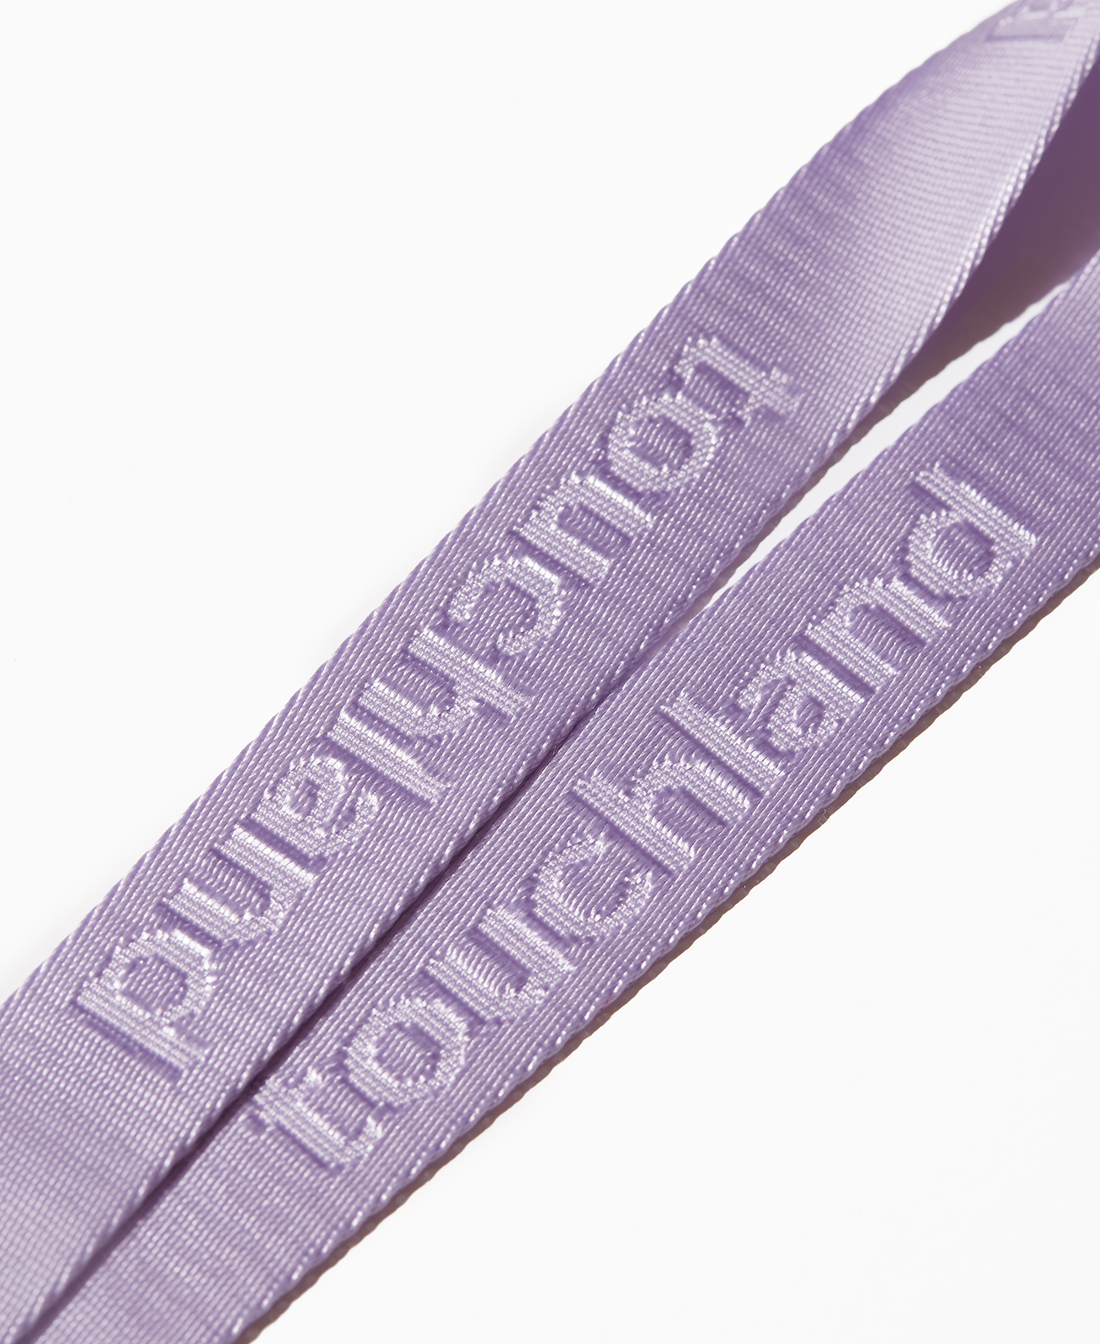 Touchland purple lanyard zoomed in on Touchland text on white background